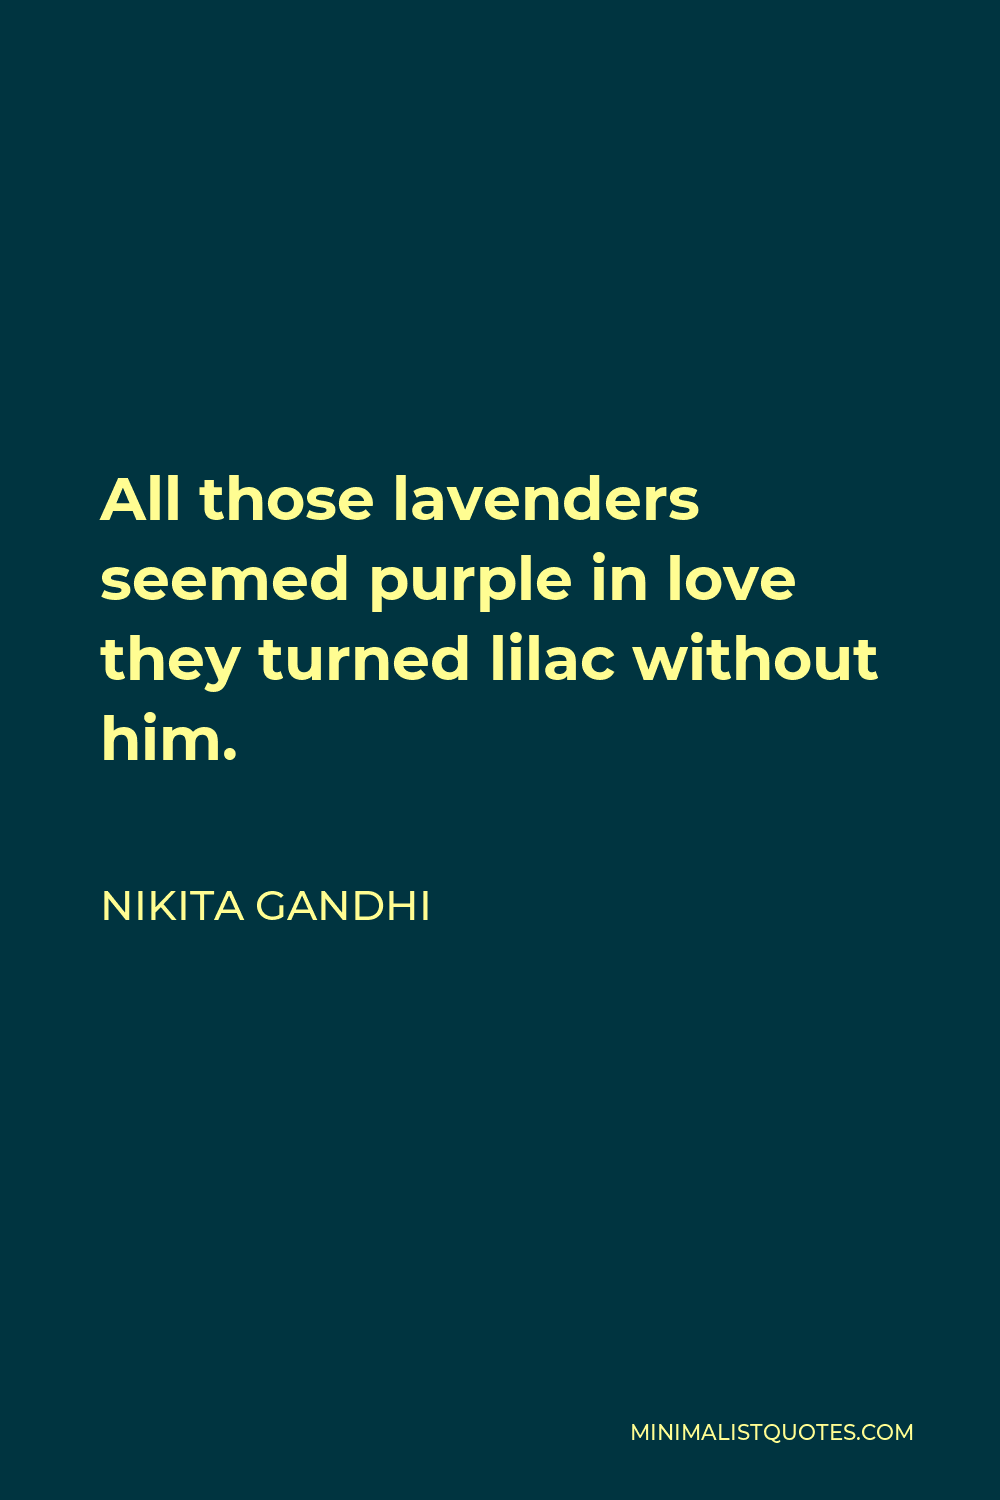 Nikita Gandhi Quote - All those lavenders seemed purple in love they turned lilac without him.